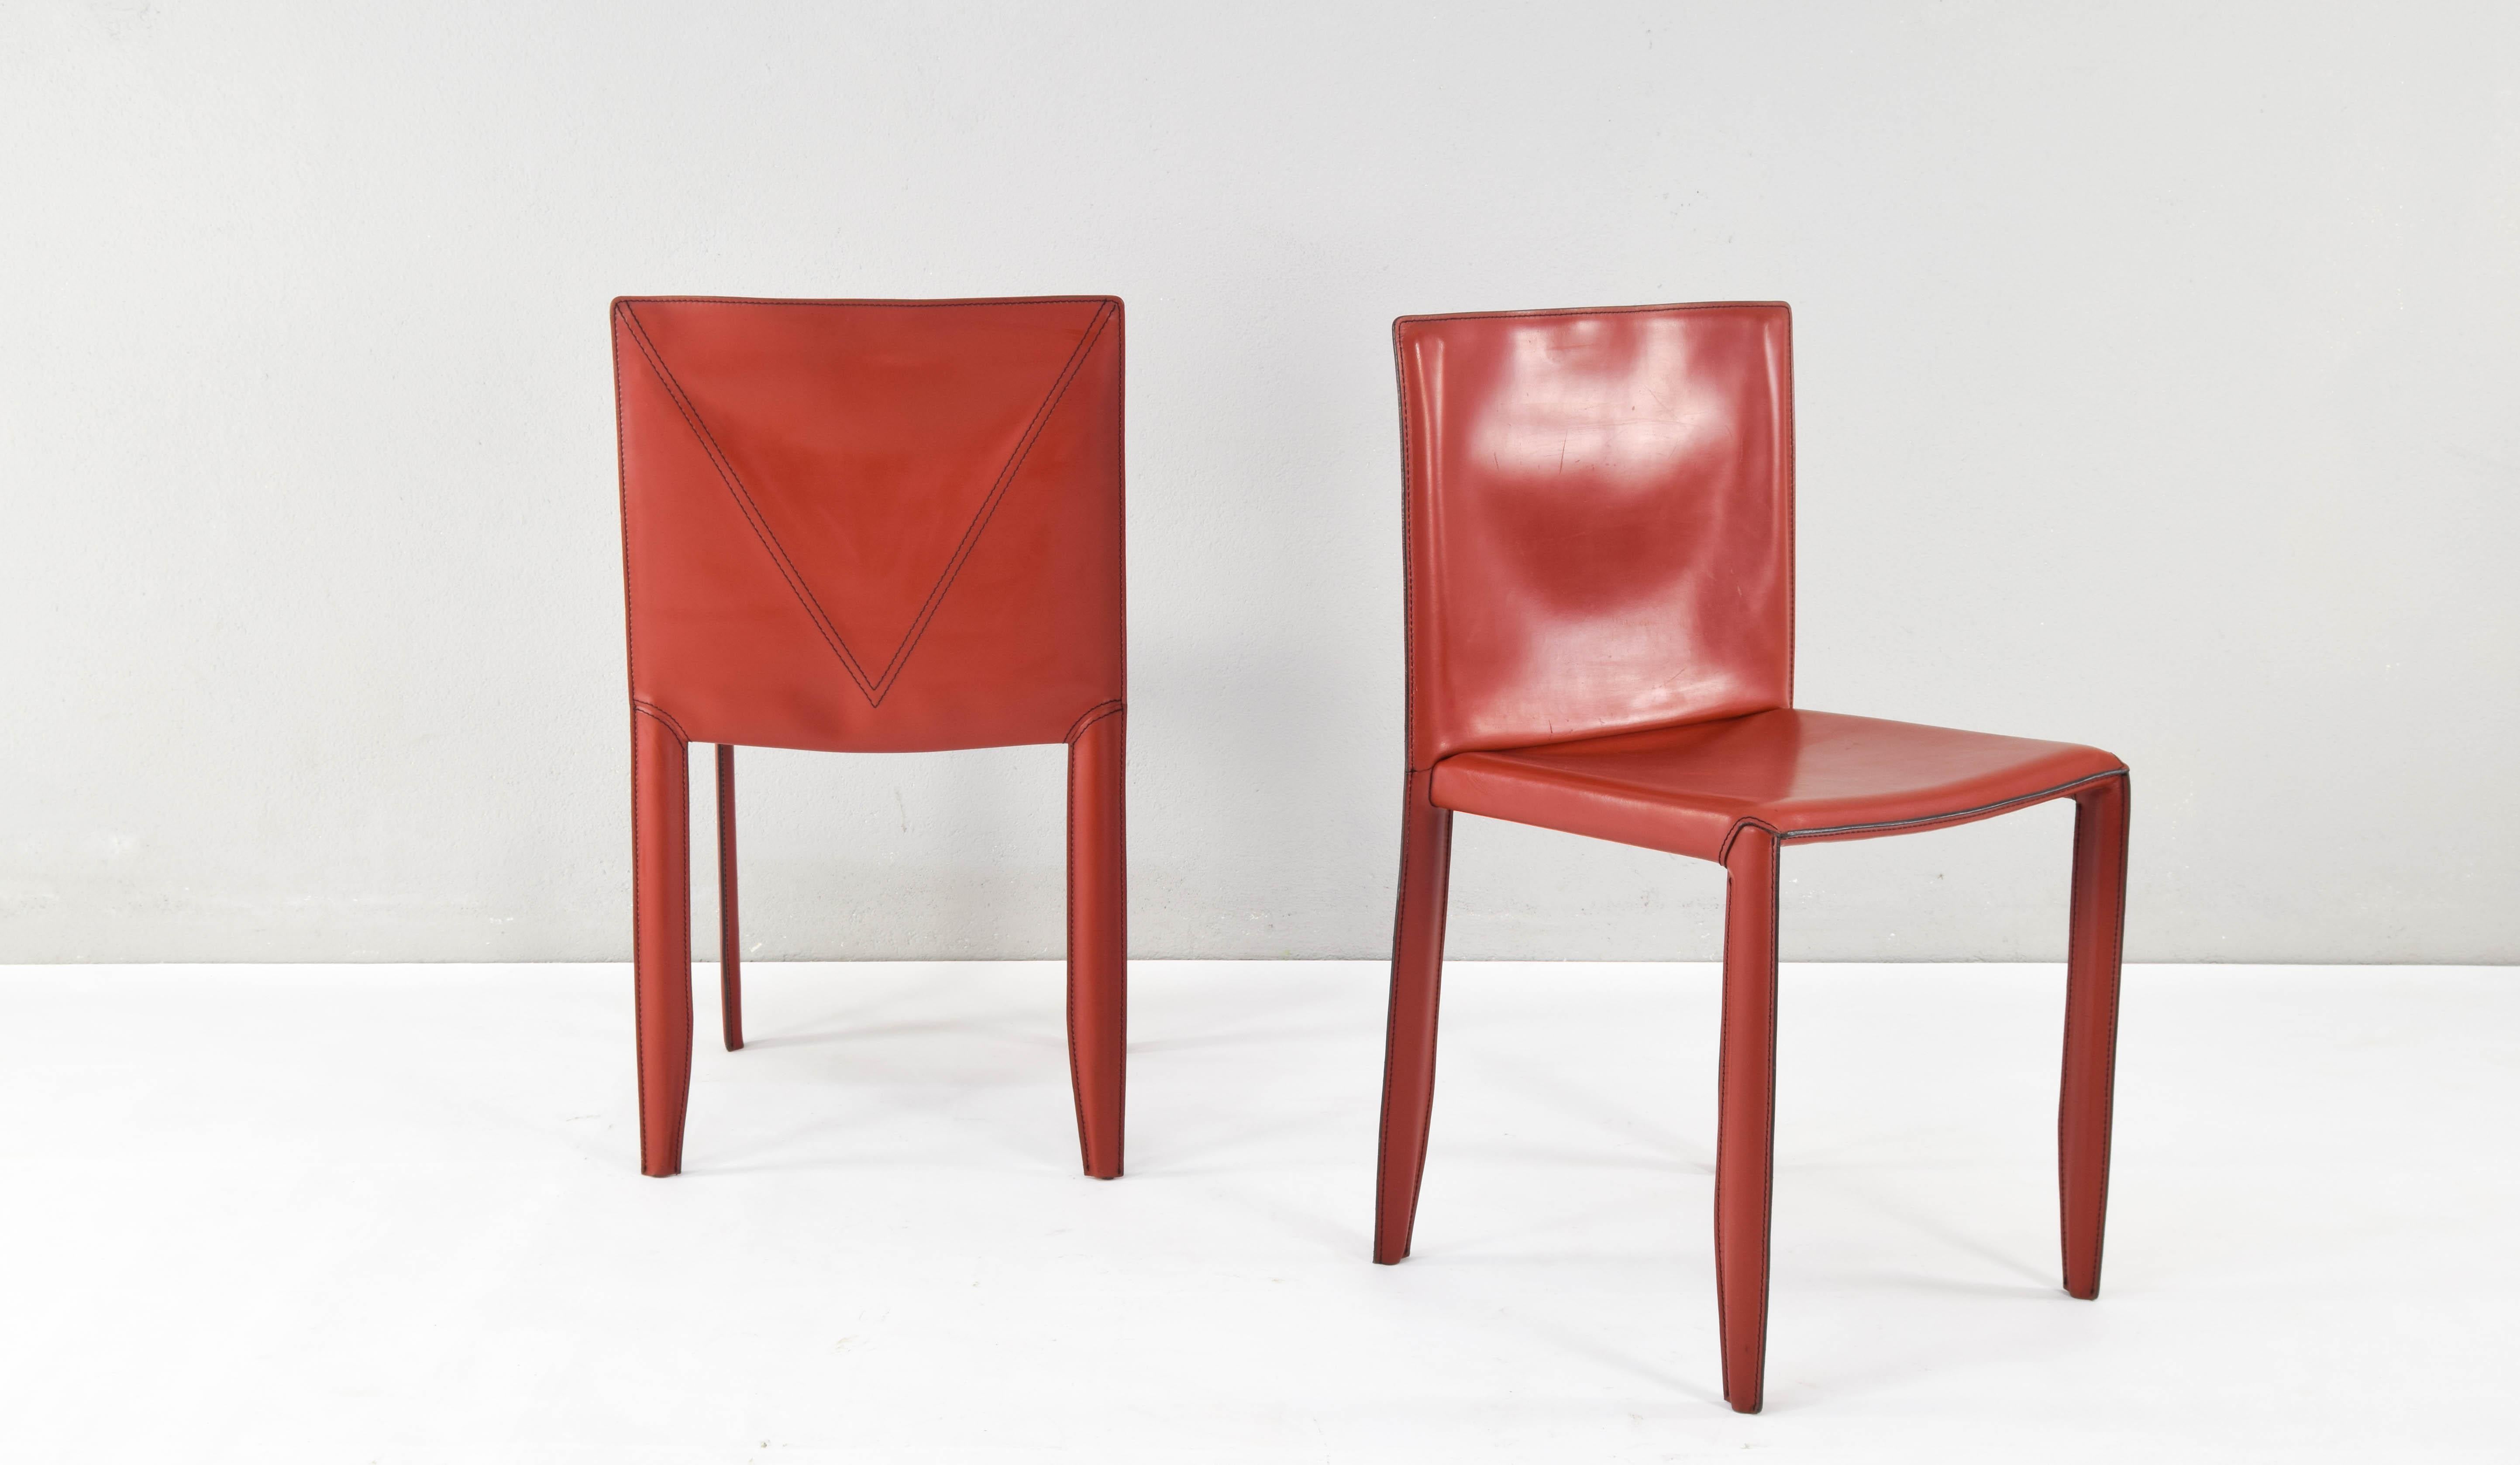 Steel Piuma Italian Modern Leather Chairs Set of Two by Studio Kronos for Cattelan 90s